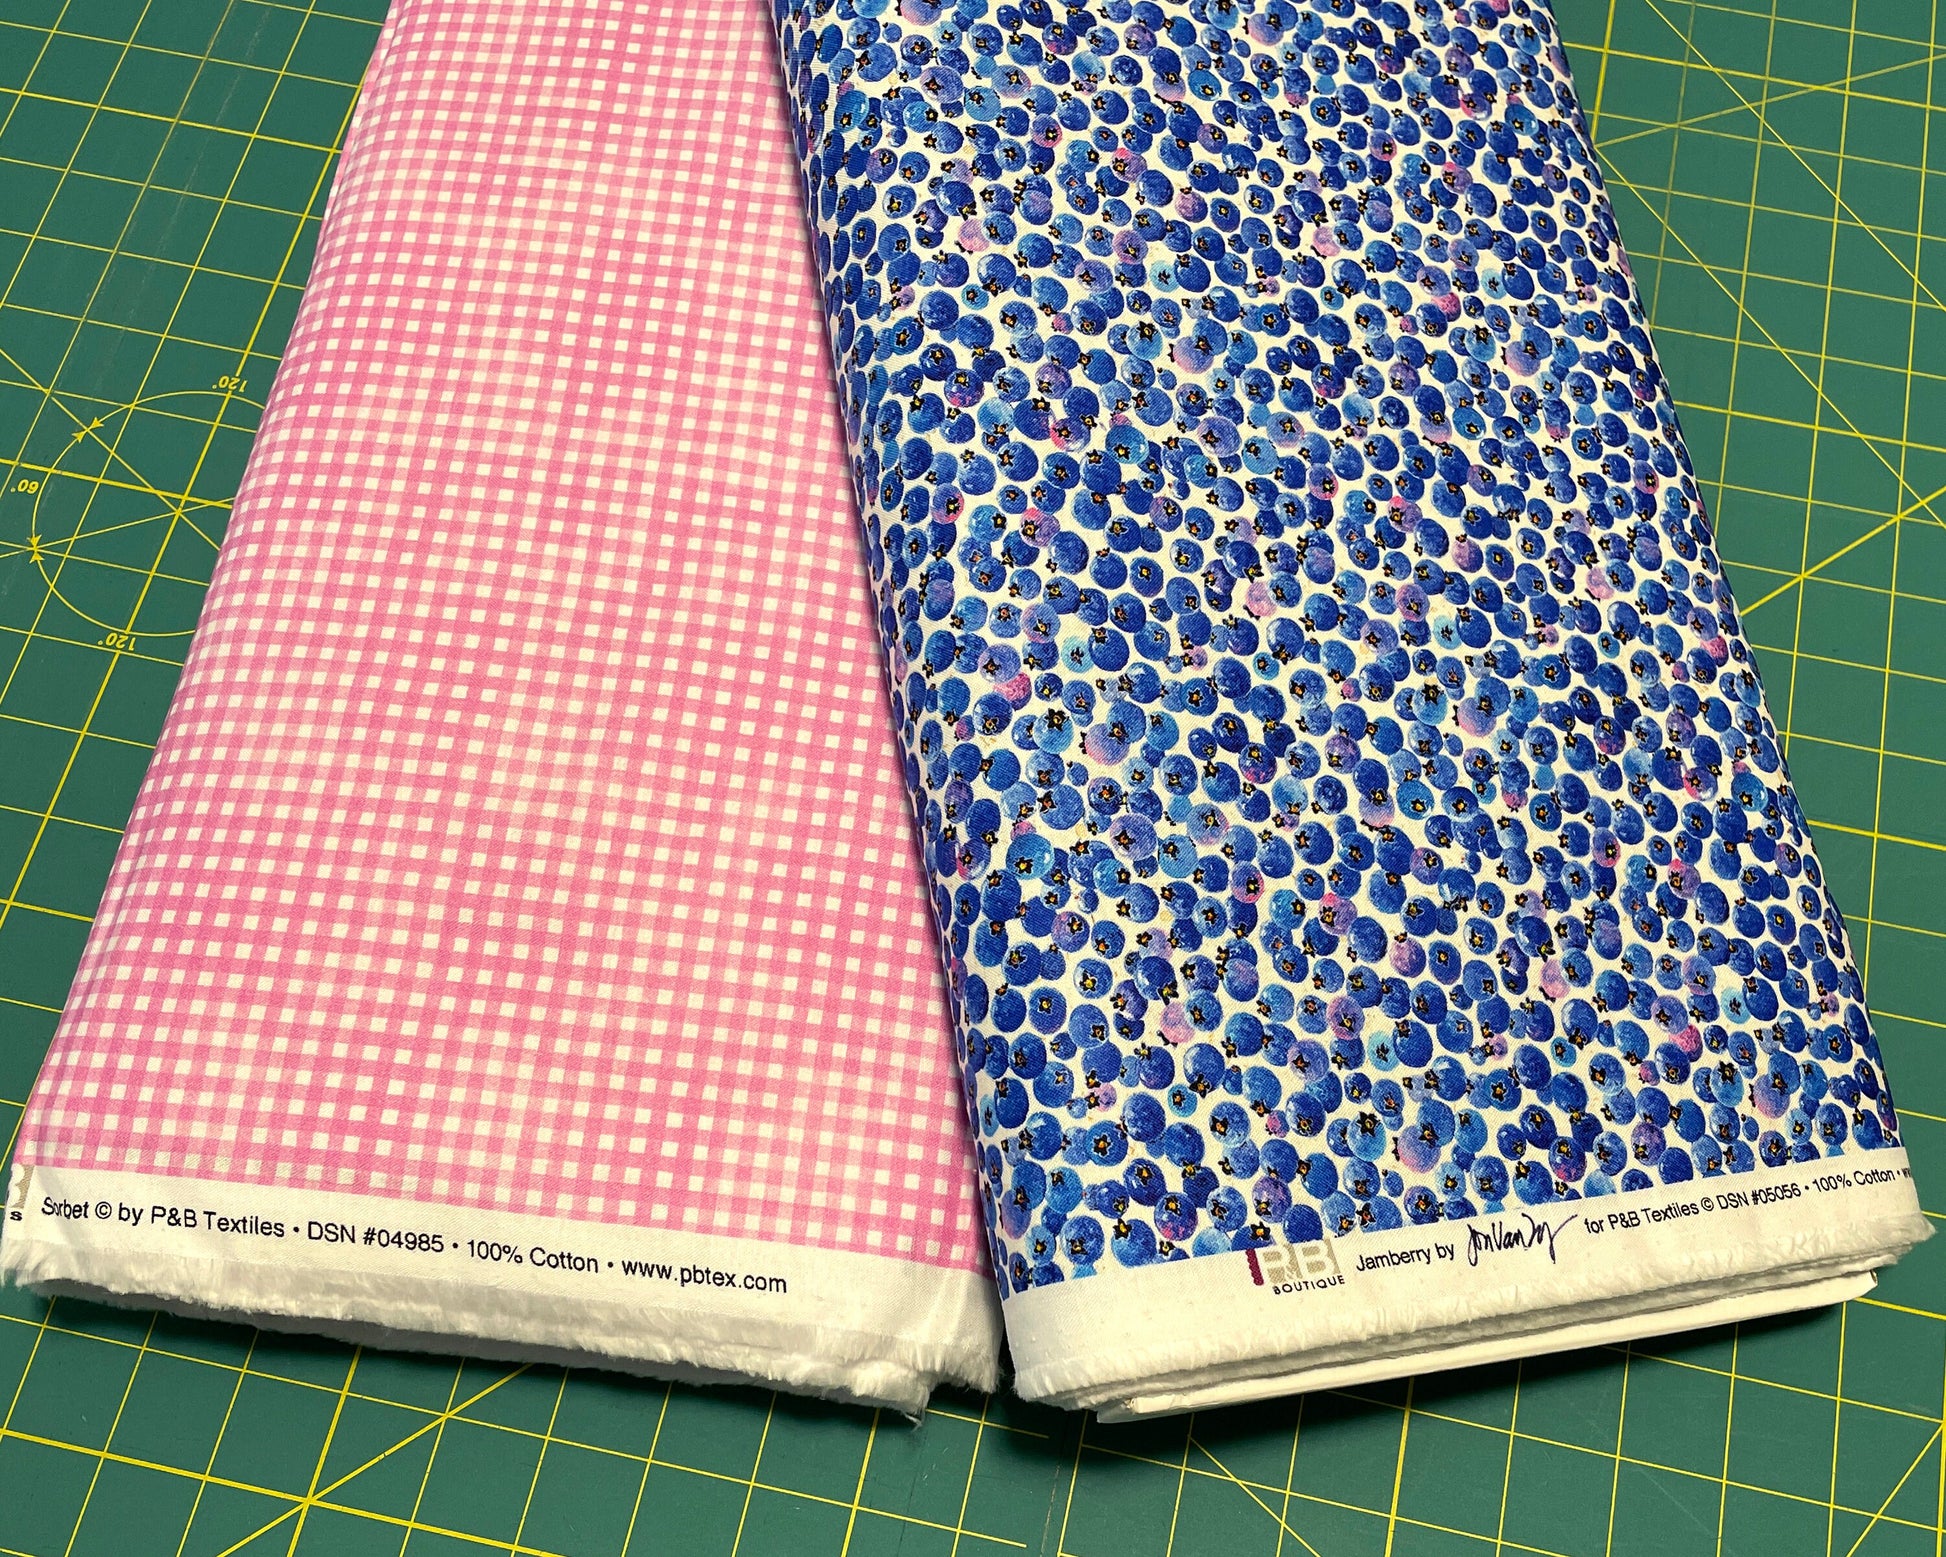 Two bolts of fabric including one with Tossed blueberries on a white background next to a Fuchsia Gingham coordinating fabric